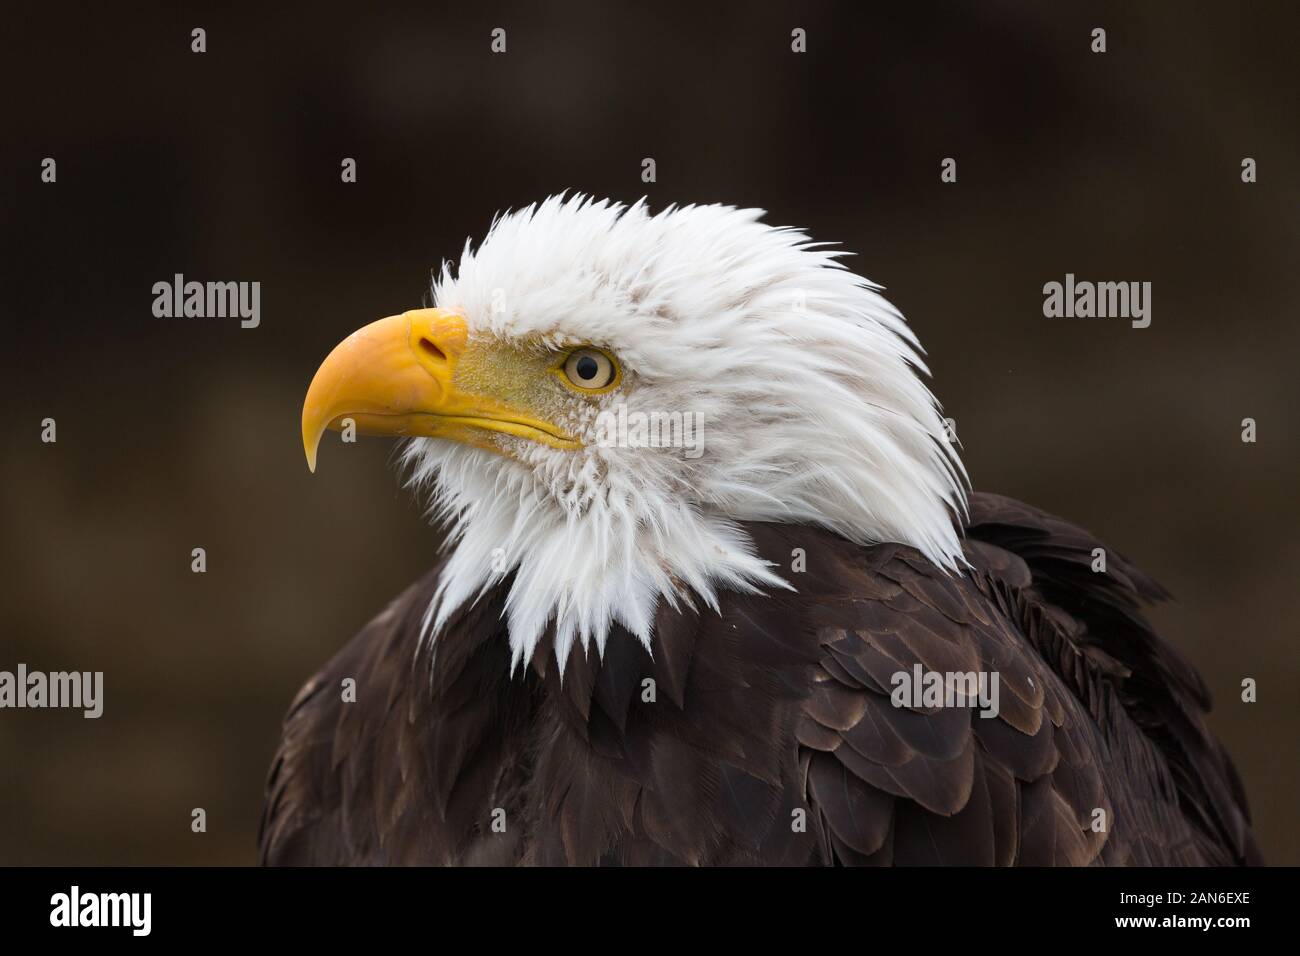 Profile of head of a bald eagle looking to the left. Neutral backround. Portrait of a majestic animal. National Symbol of the USA. Stock Photo